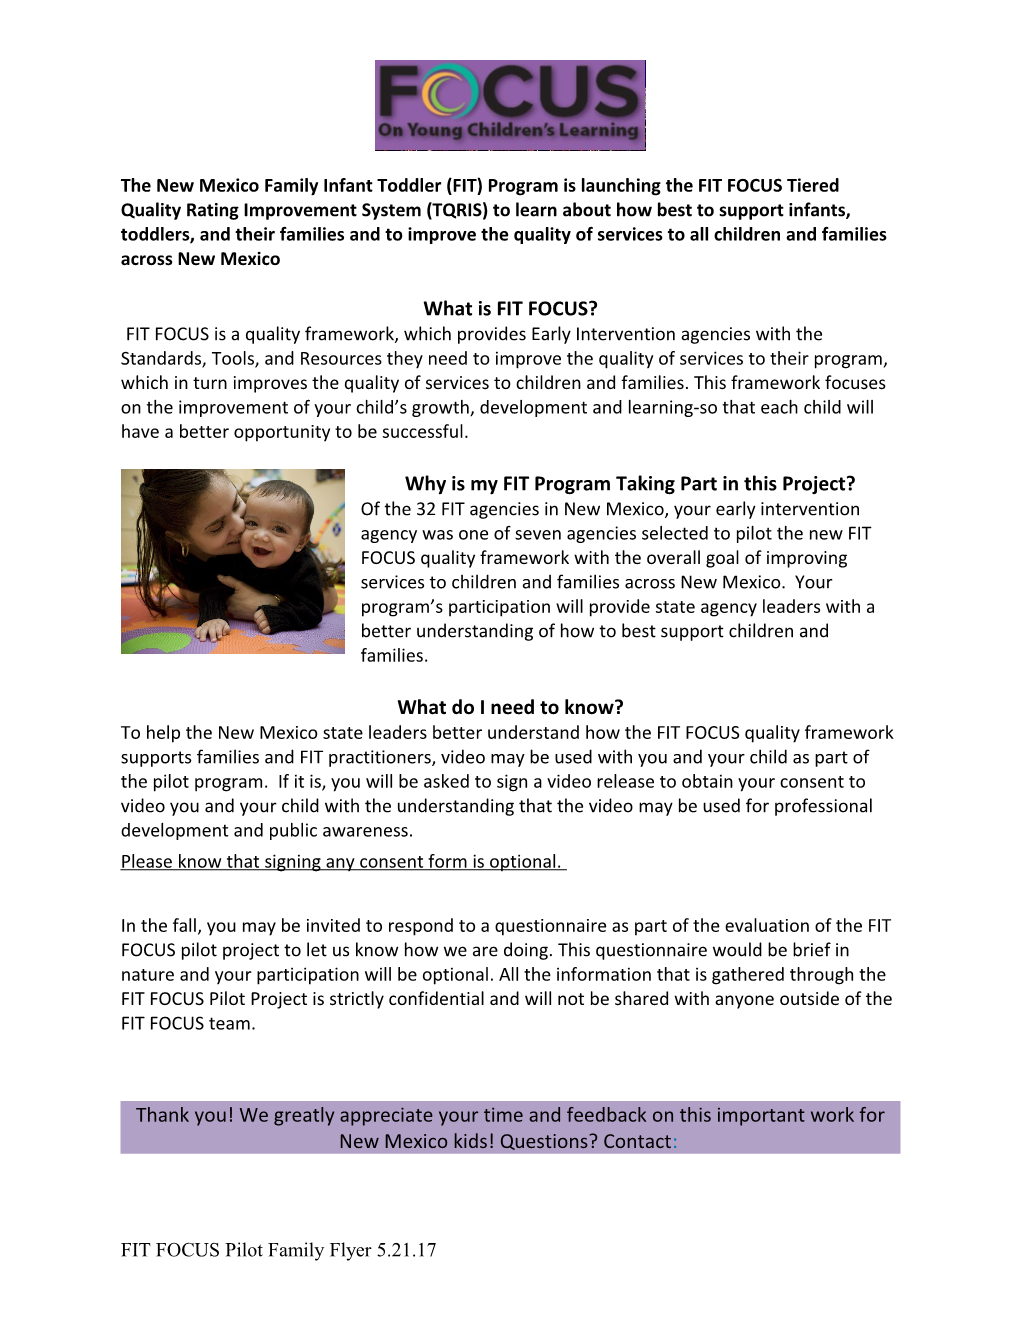 The New Mexico Family Infant Toddler (FIT) Program Is Launching the FIT FOCUS Tiered Quality